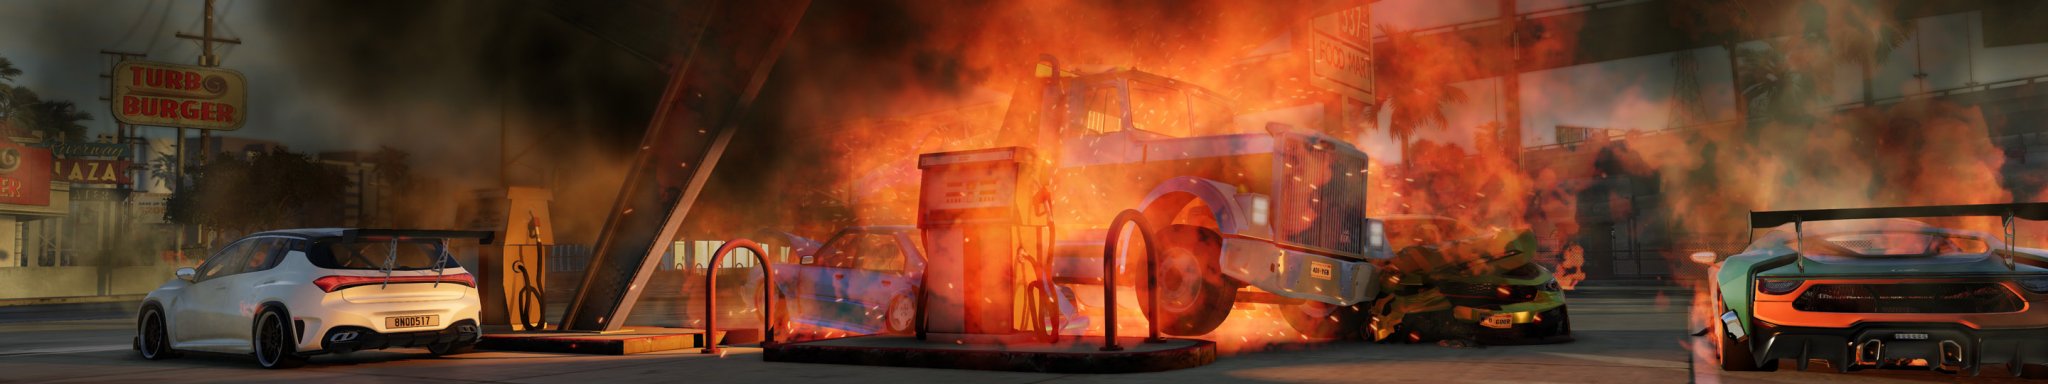 0a BeamNG Multiple VEHICLE Gas Station FIRE EXPLOSION copy.jpg